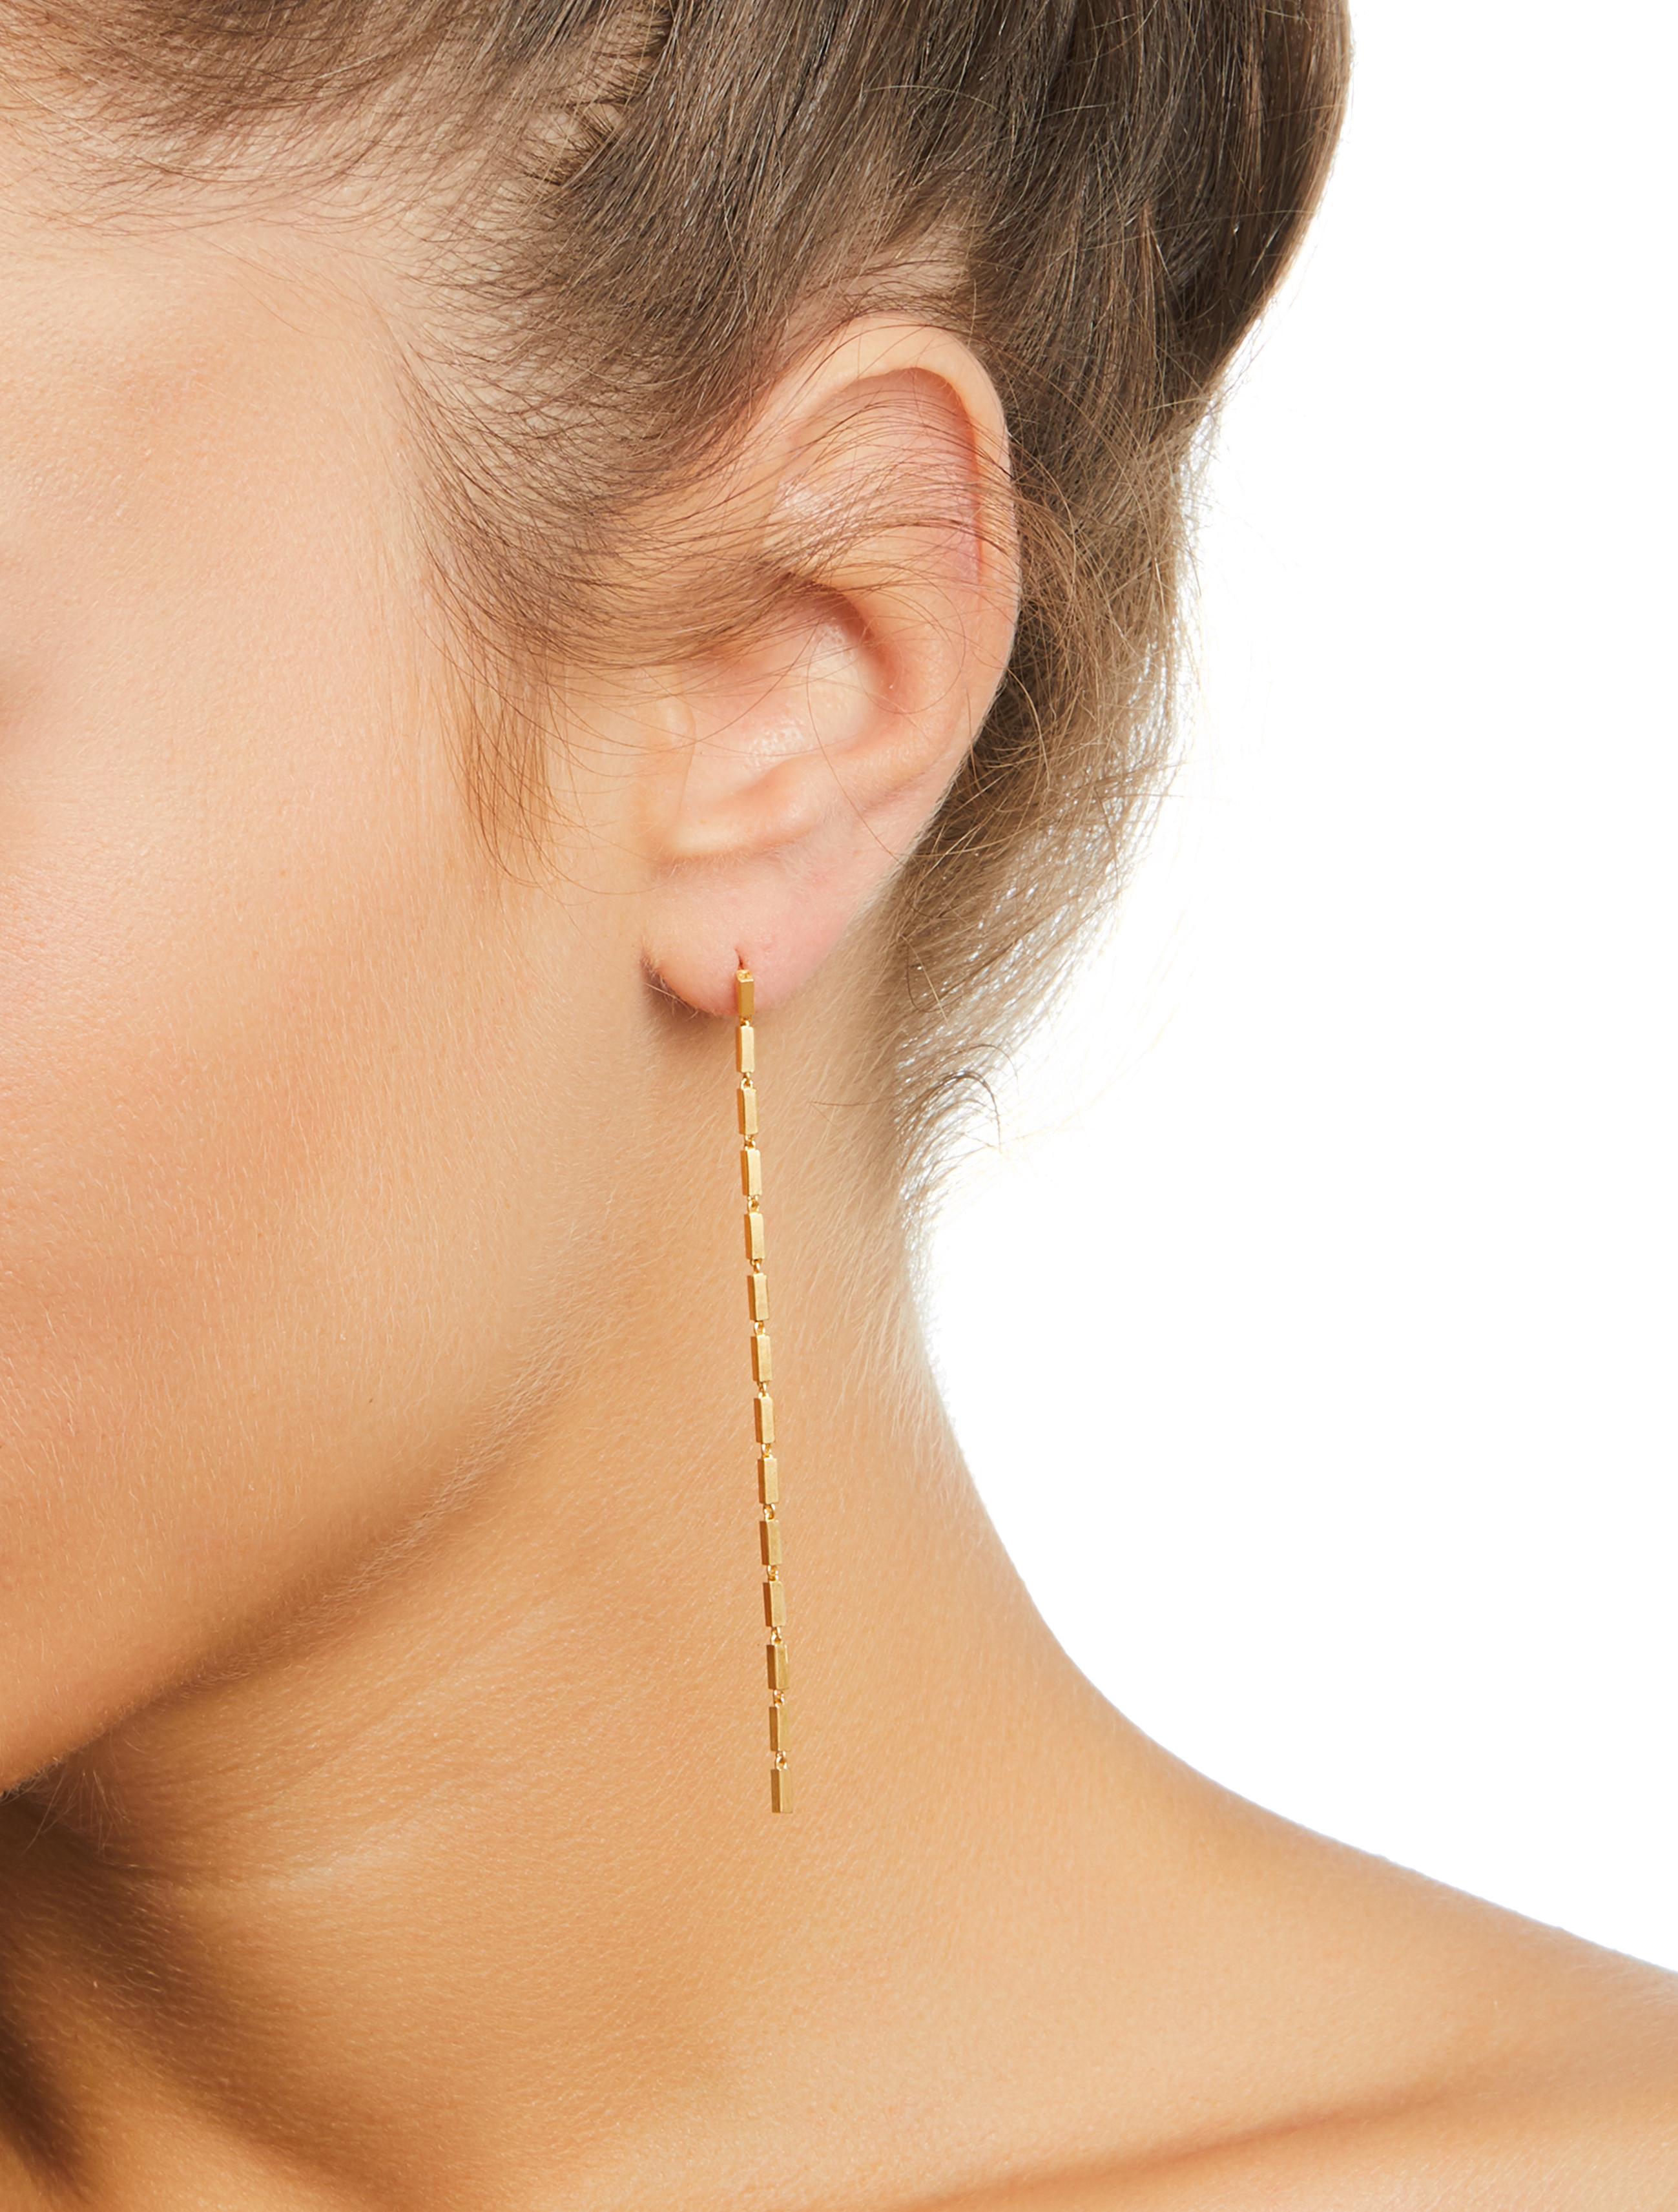 Disco Single Long

18 karat gold plated sterling silver chain earrings that consists of rectangular motifs linked to each other. These earrings are very lightweight and can be worn in all occasions. All of our earrings have 10 K posts to avoid